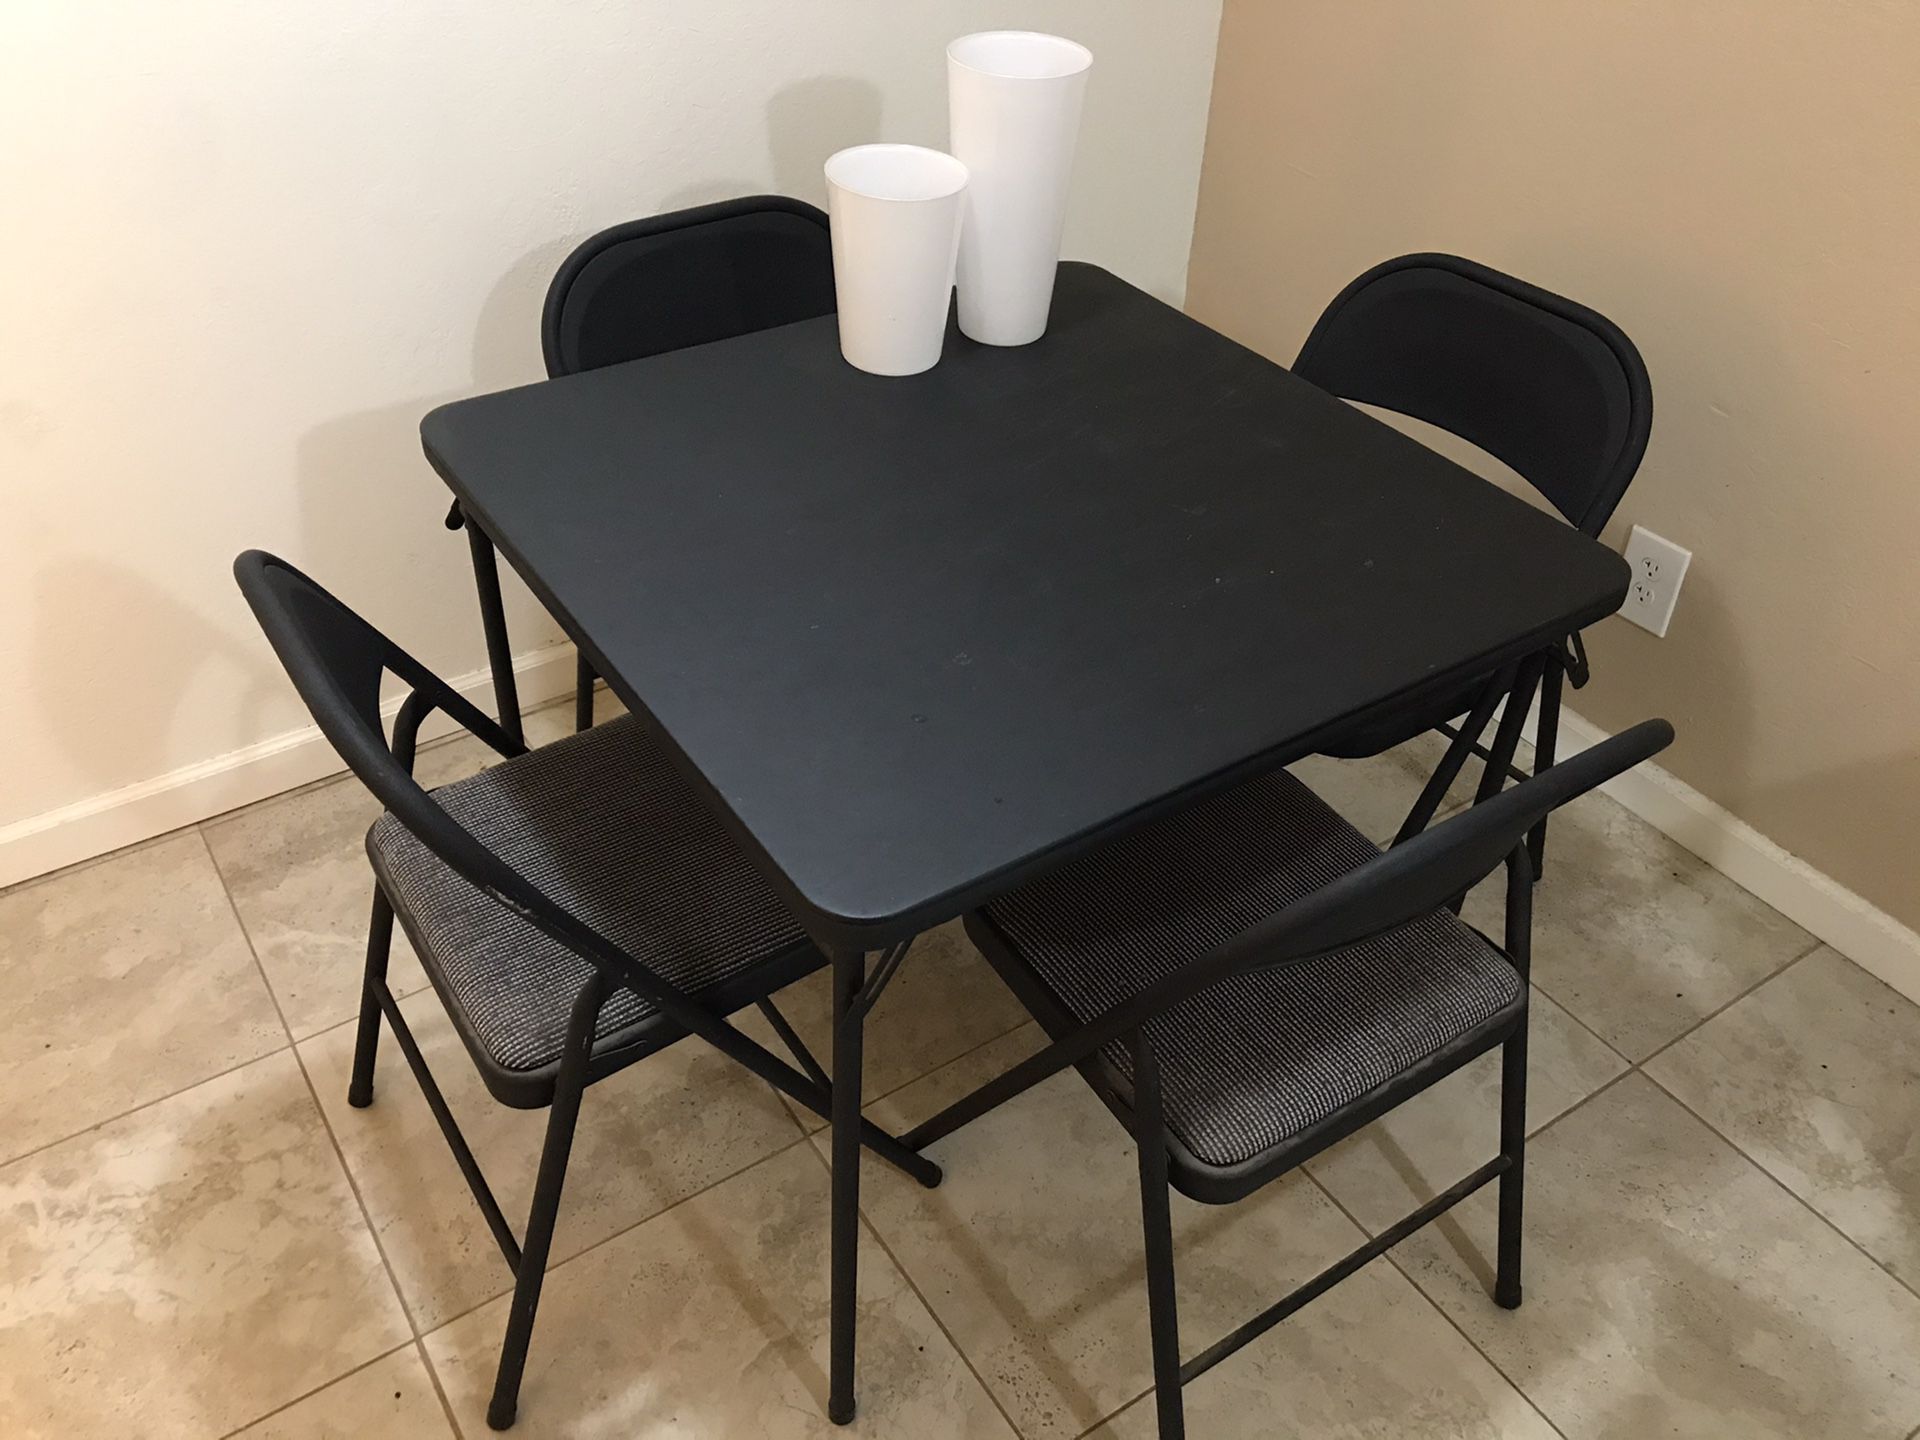 Dining Table with Four Chairs